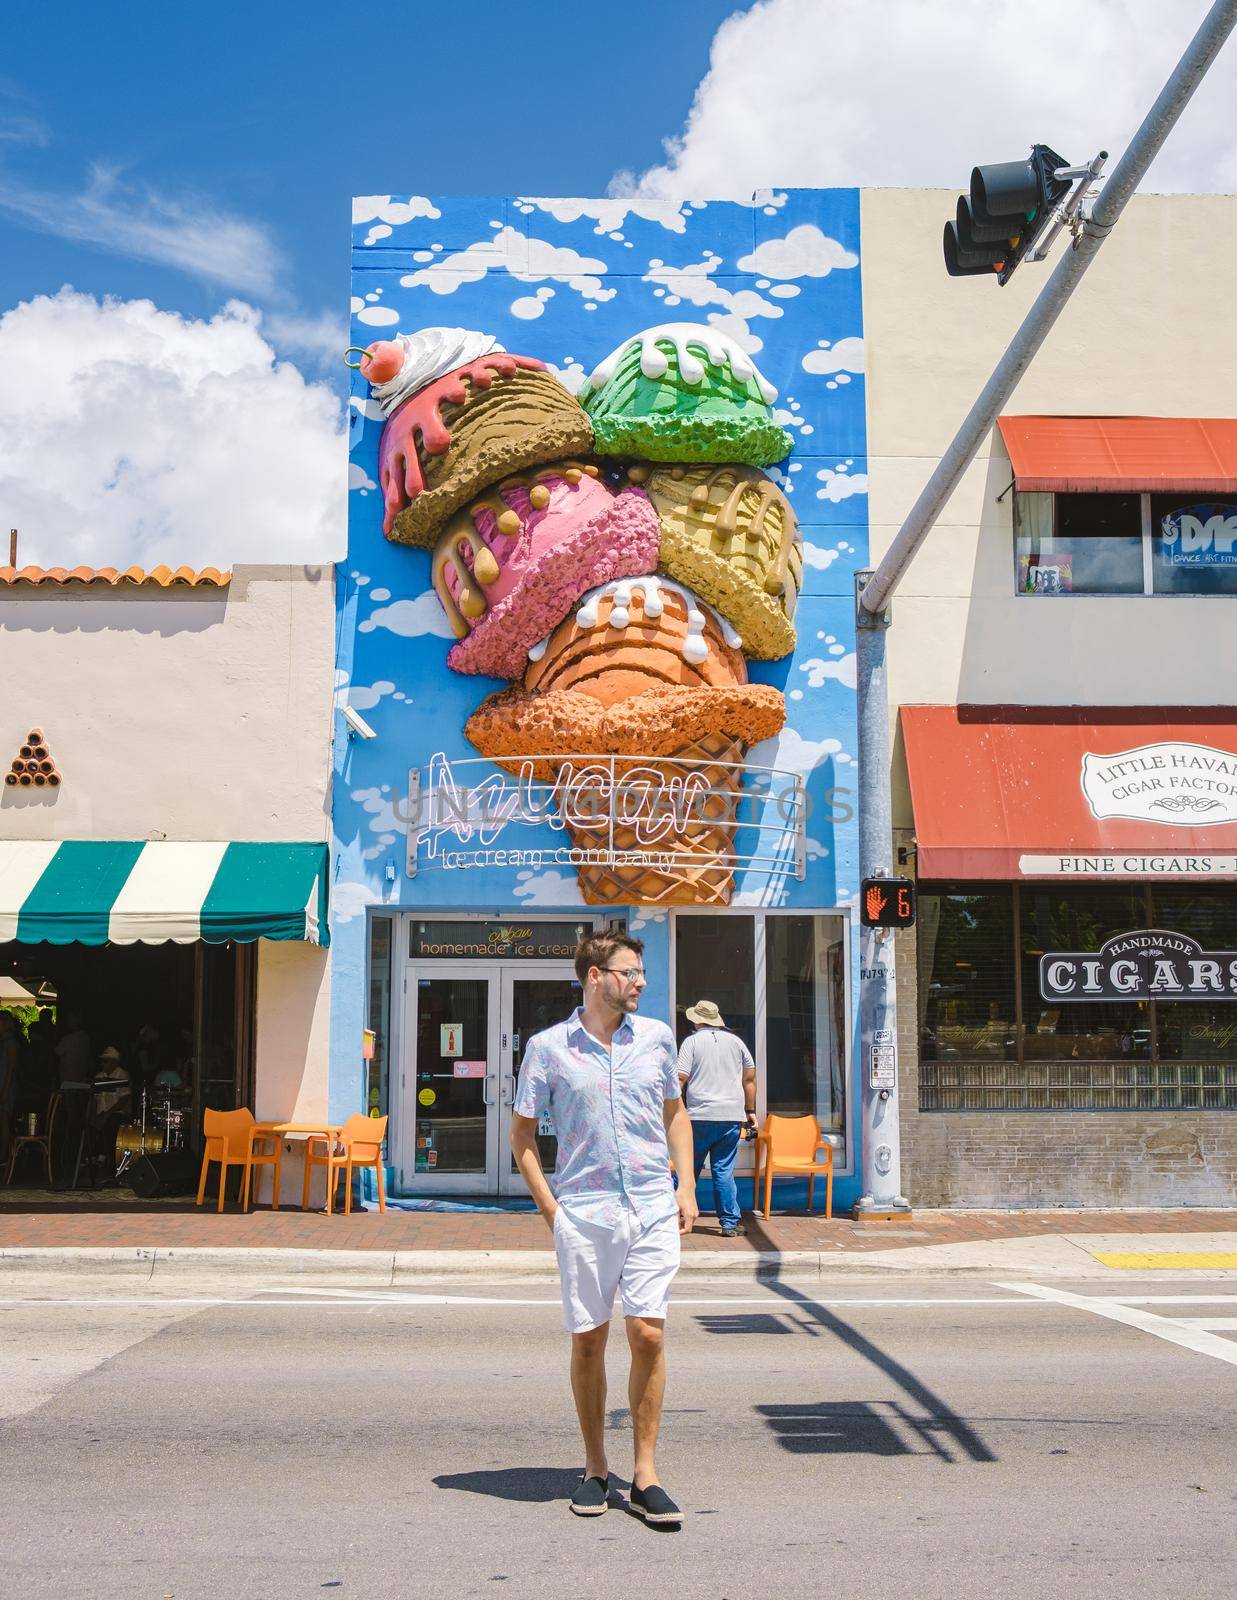 Little Havana Miami Florida April 2019, colorful Streets of Little Havana in Miami with art on the walls. men having a ice cream during summer